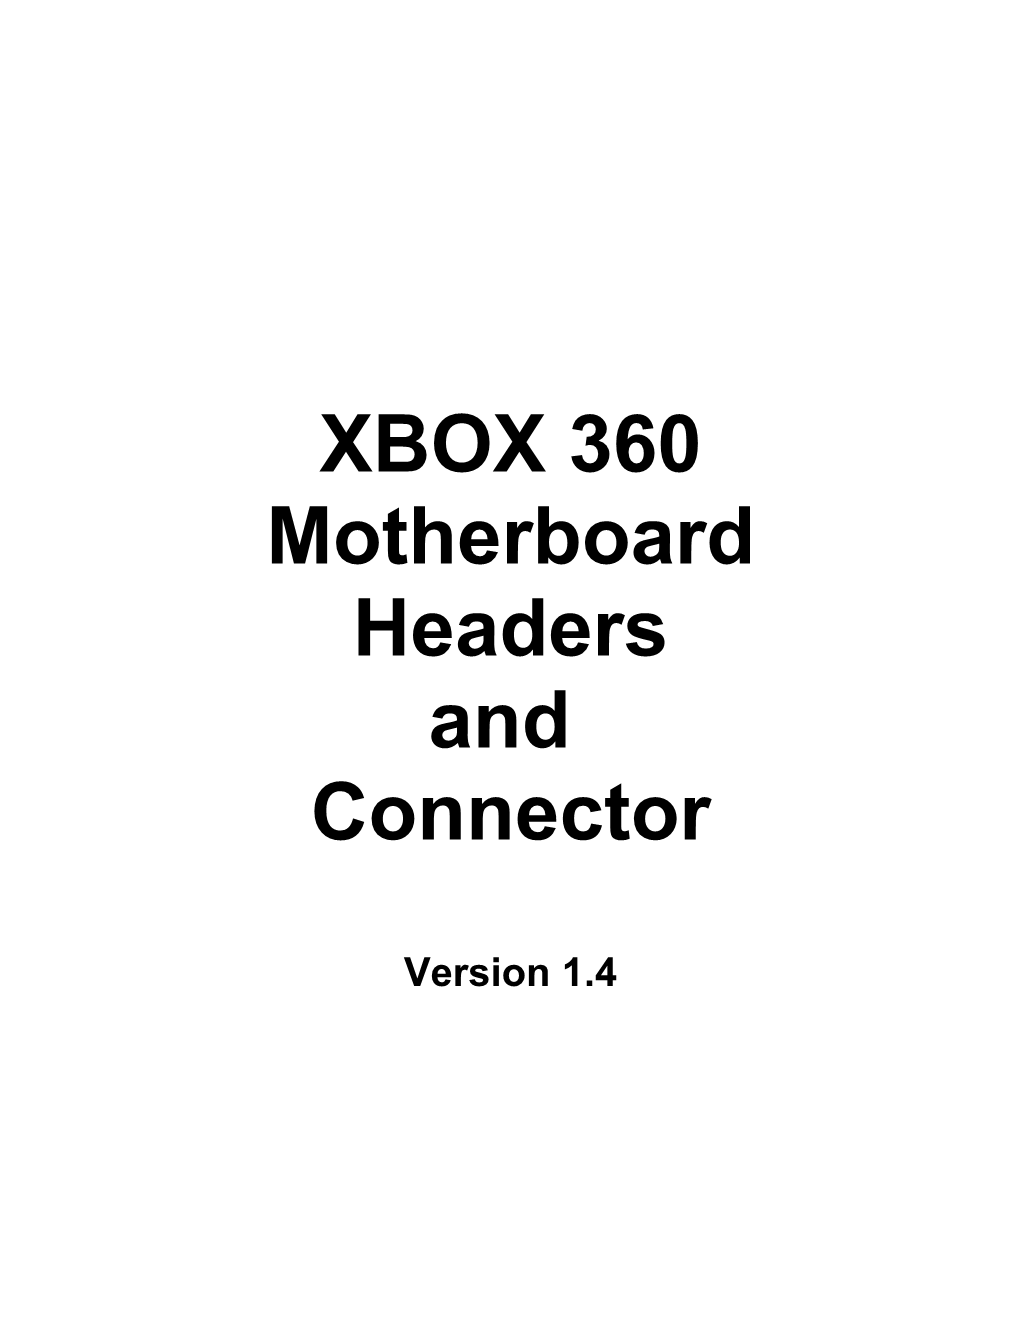 XBOX 360 Motherboard Headers and Connector